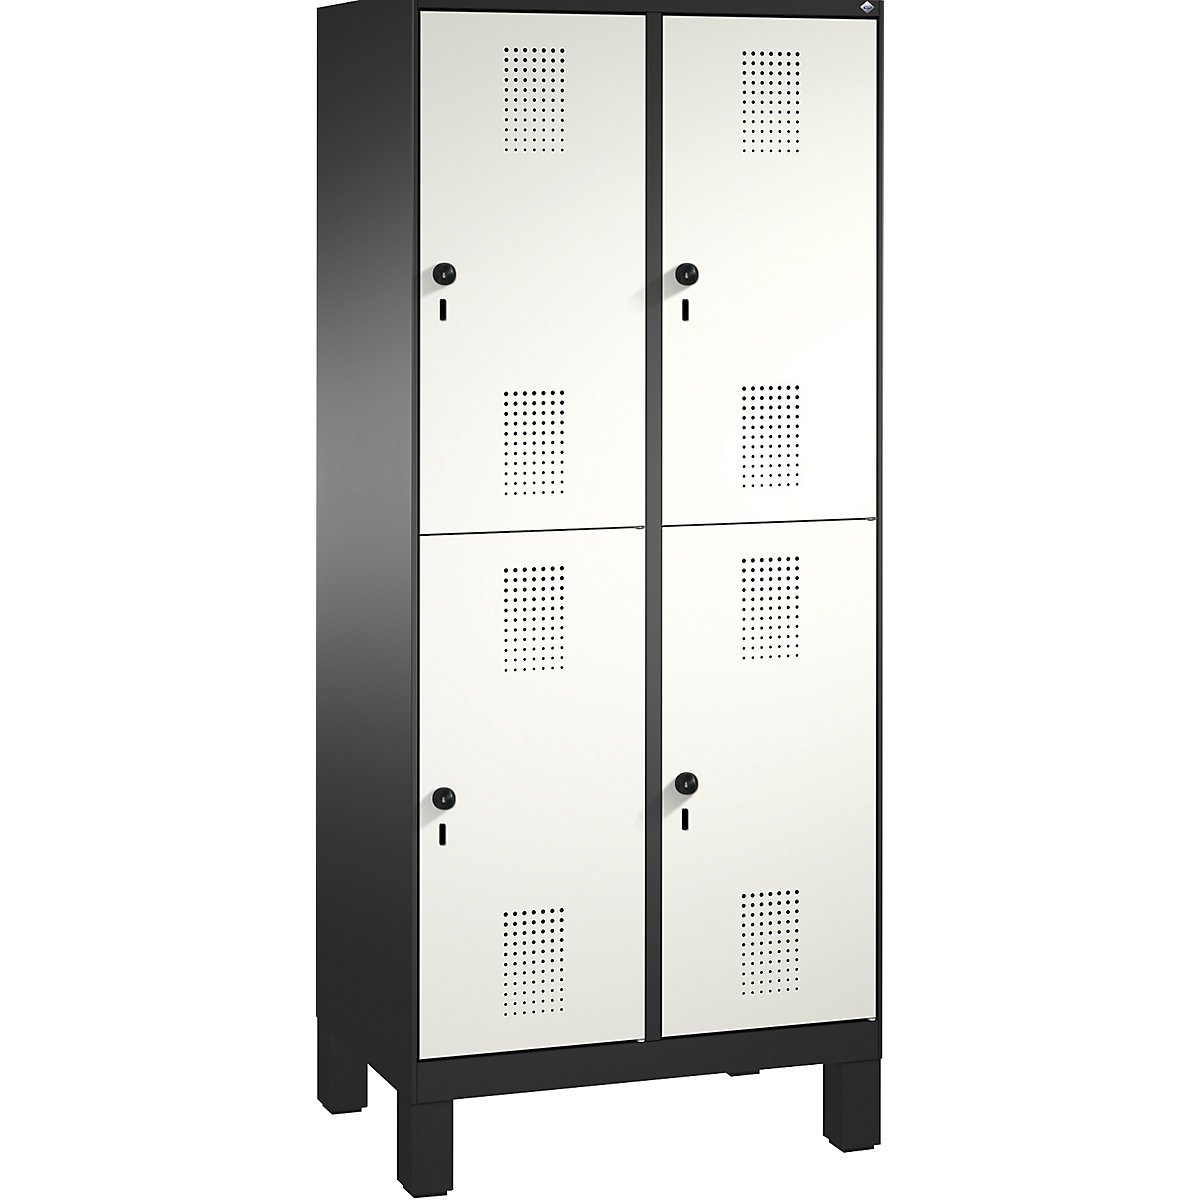 EVOLO cloakroom locker, double tier, with feet – C+P, 2 compartments, 2 shelf compartments each, compartment width 400 mm, black grey / traffic white-16